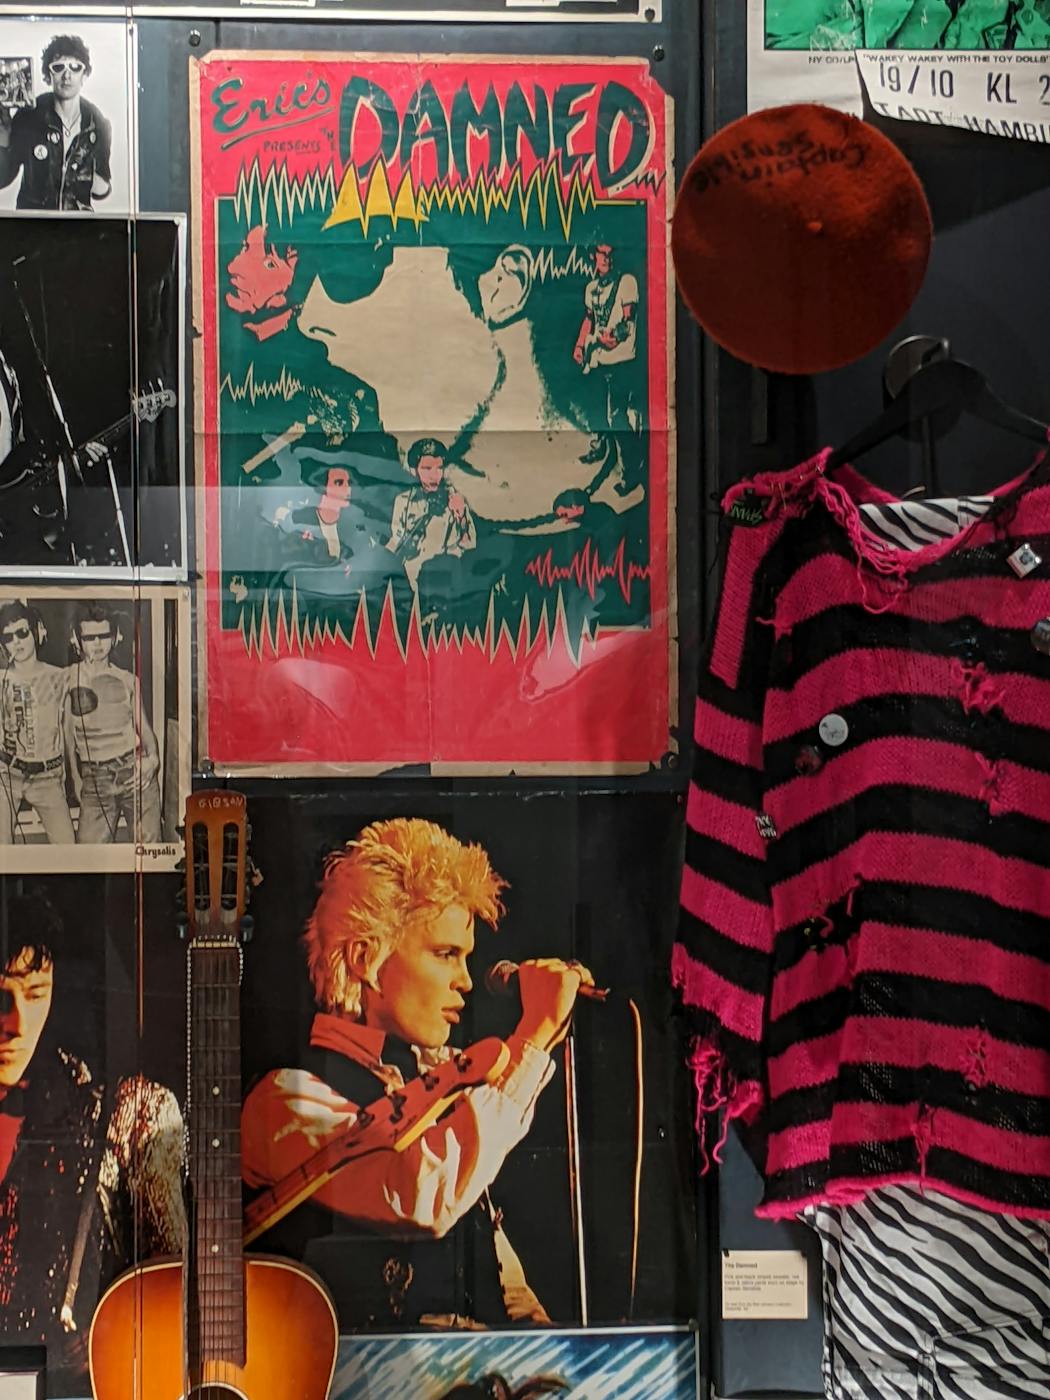 The Punk Rock Museum opened April 1.